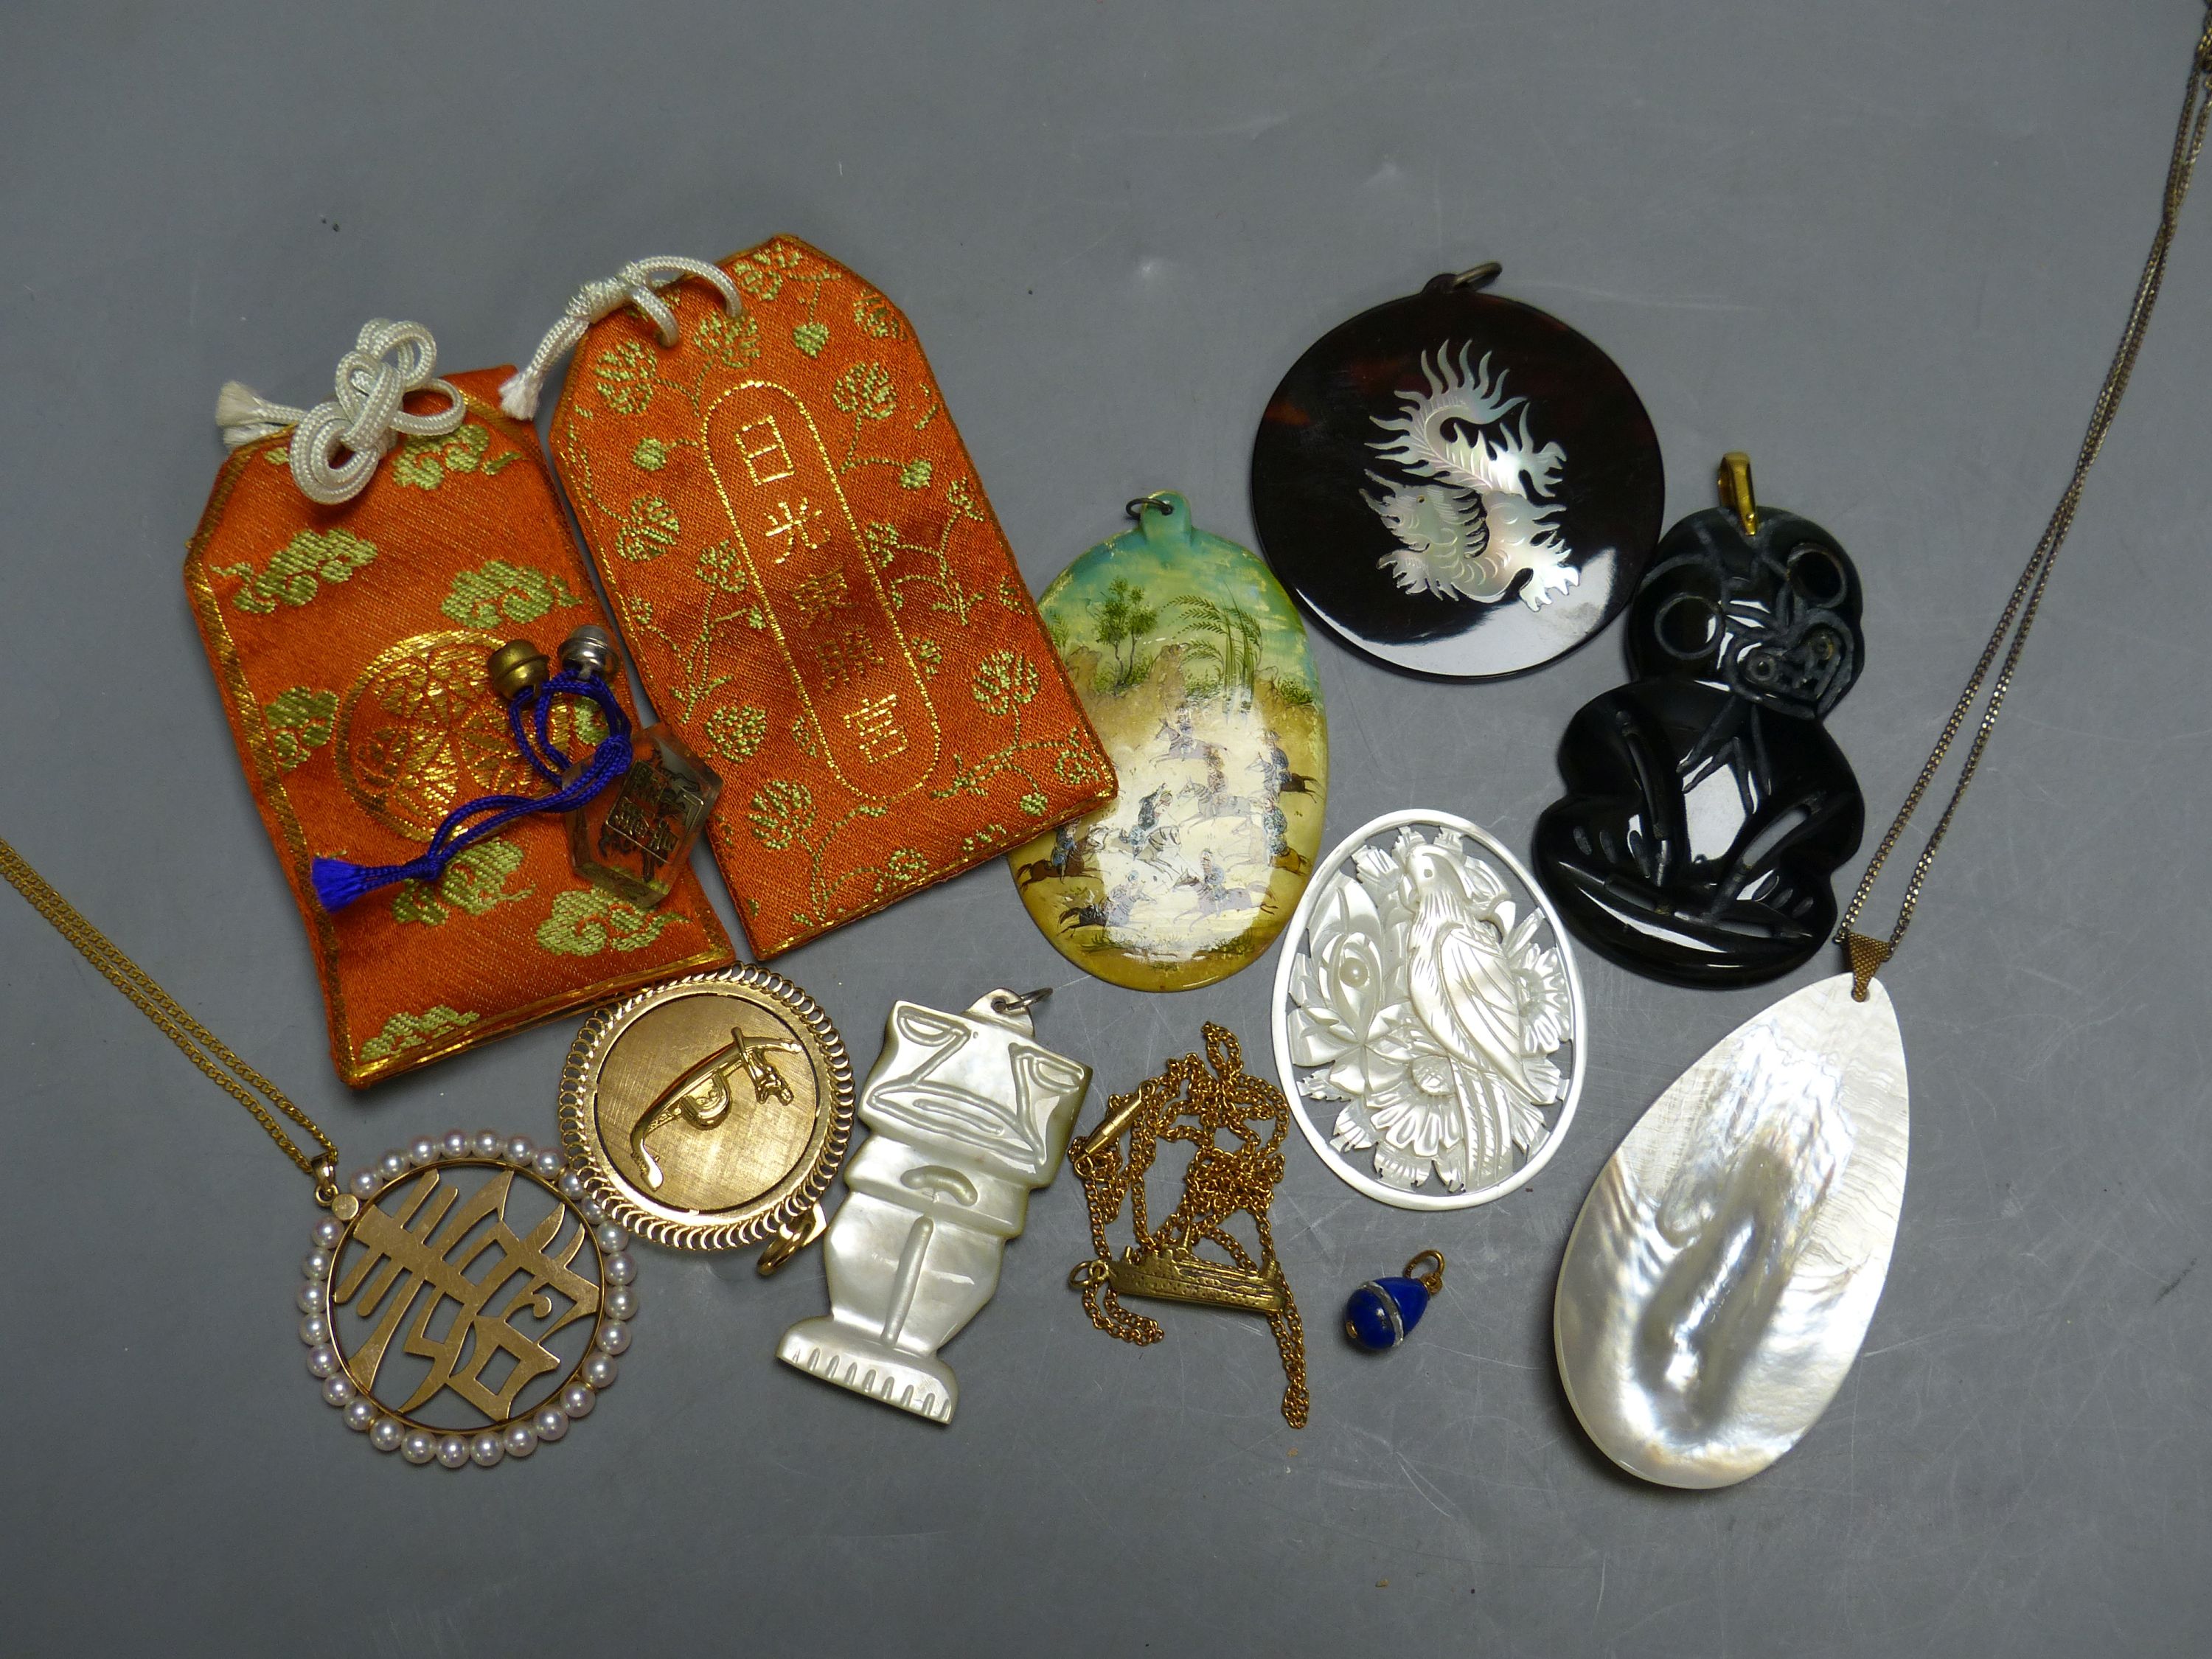 Miscellaneous decorative items, including a Mughal oval miniature on mother of pearl of polo players, a black painted hardstone tiki